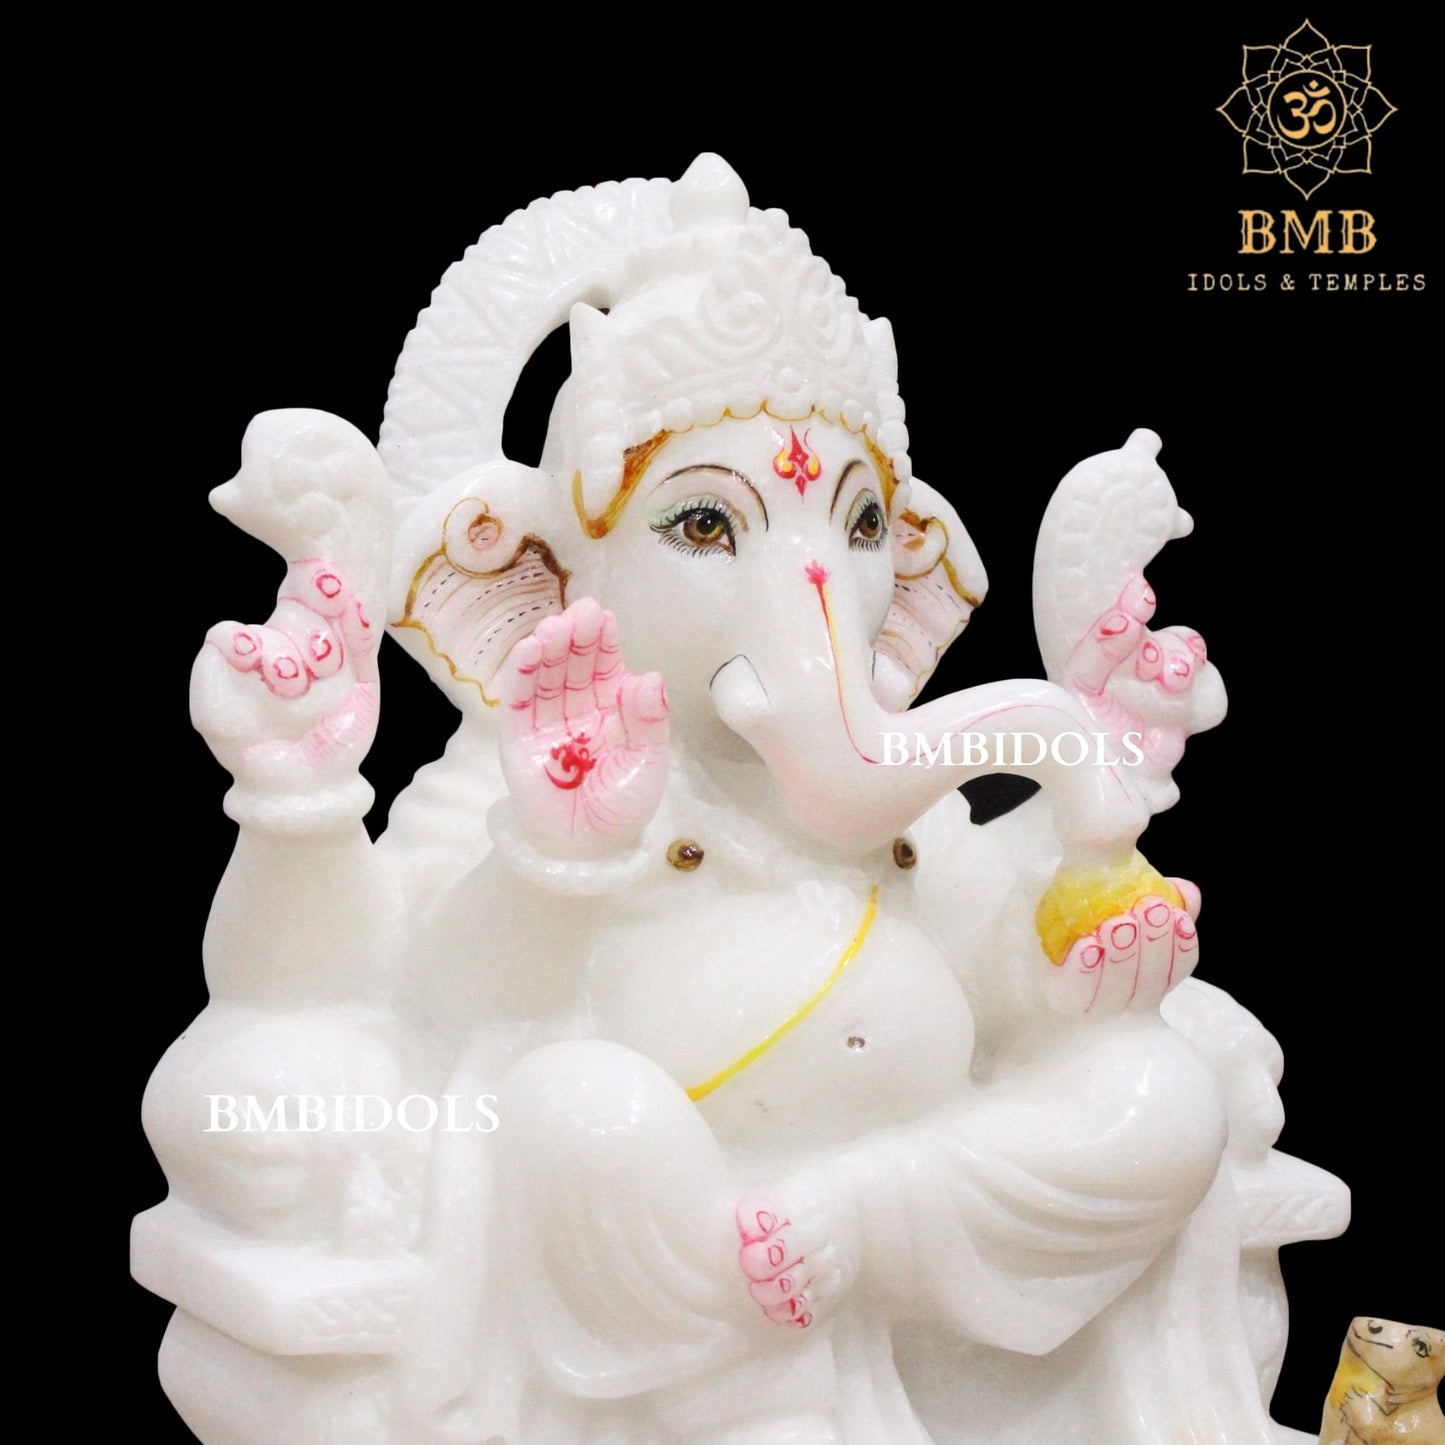 White Makrana Marble Ganesh Murti with four Hands in 12inches